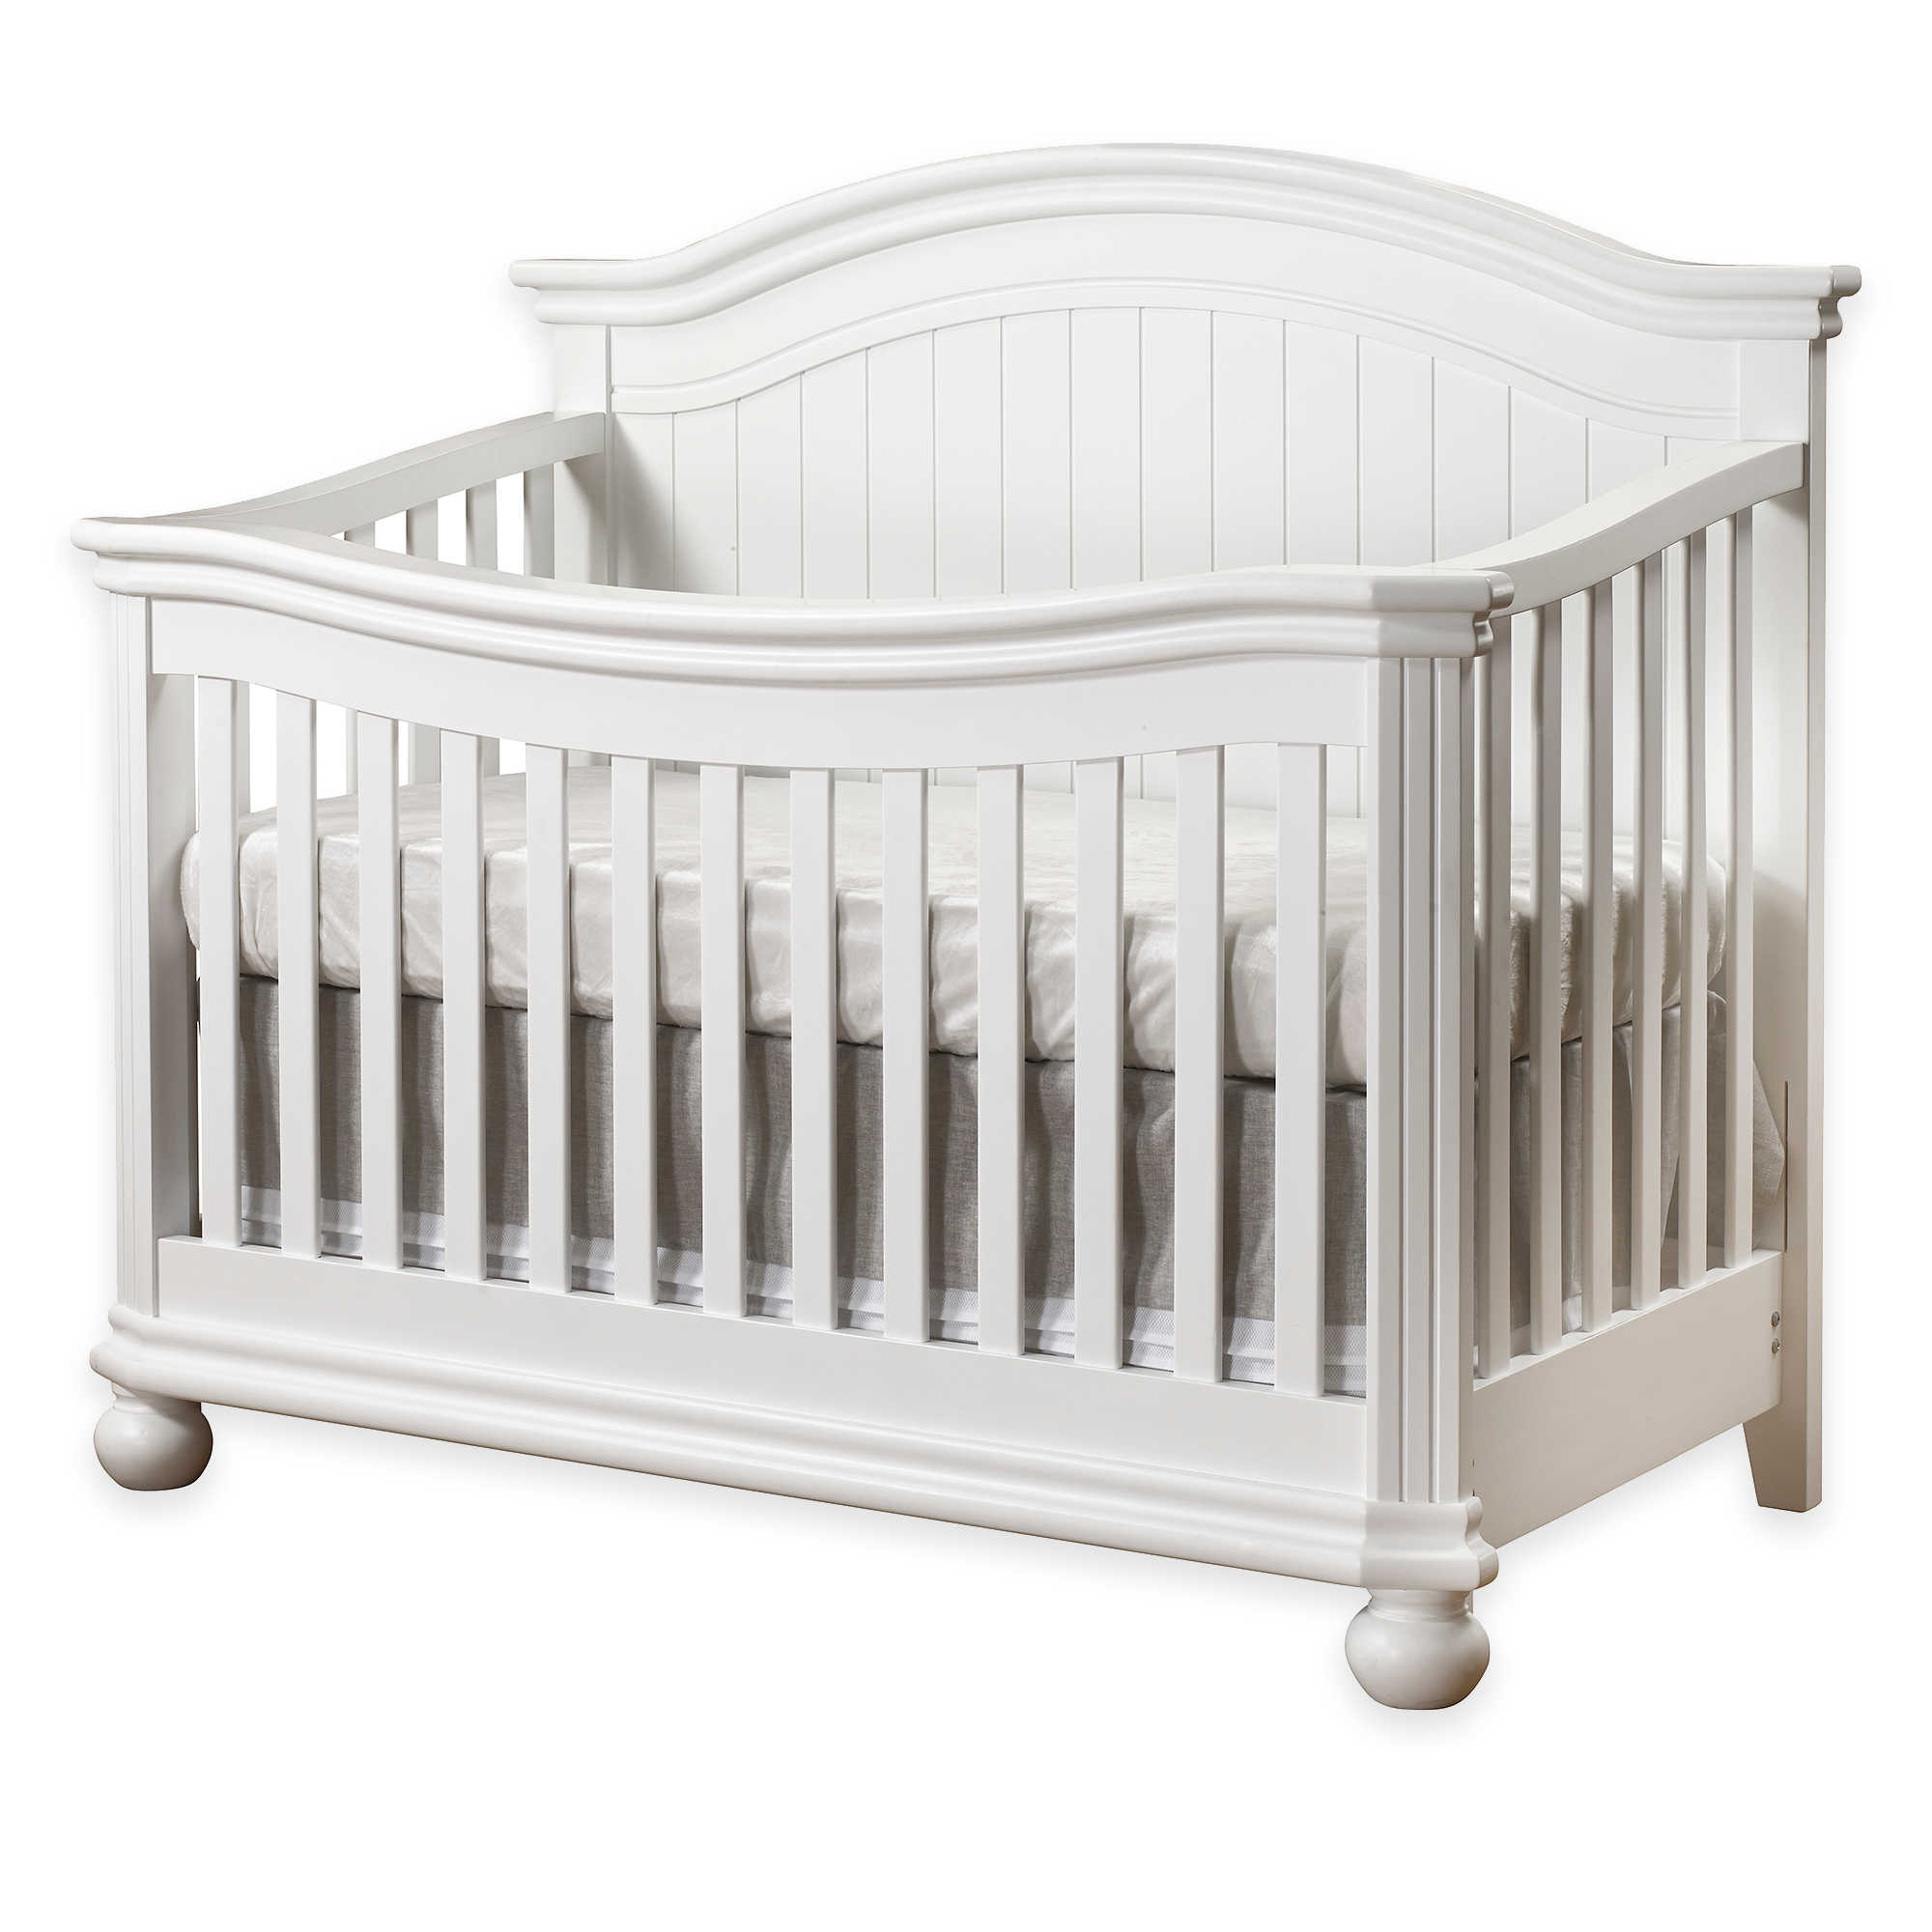 Sorelle Finley 4-in-1 Convertible Crib in White - buybuy BABY